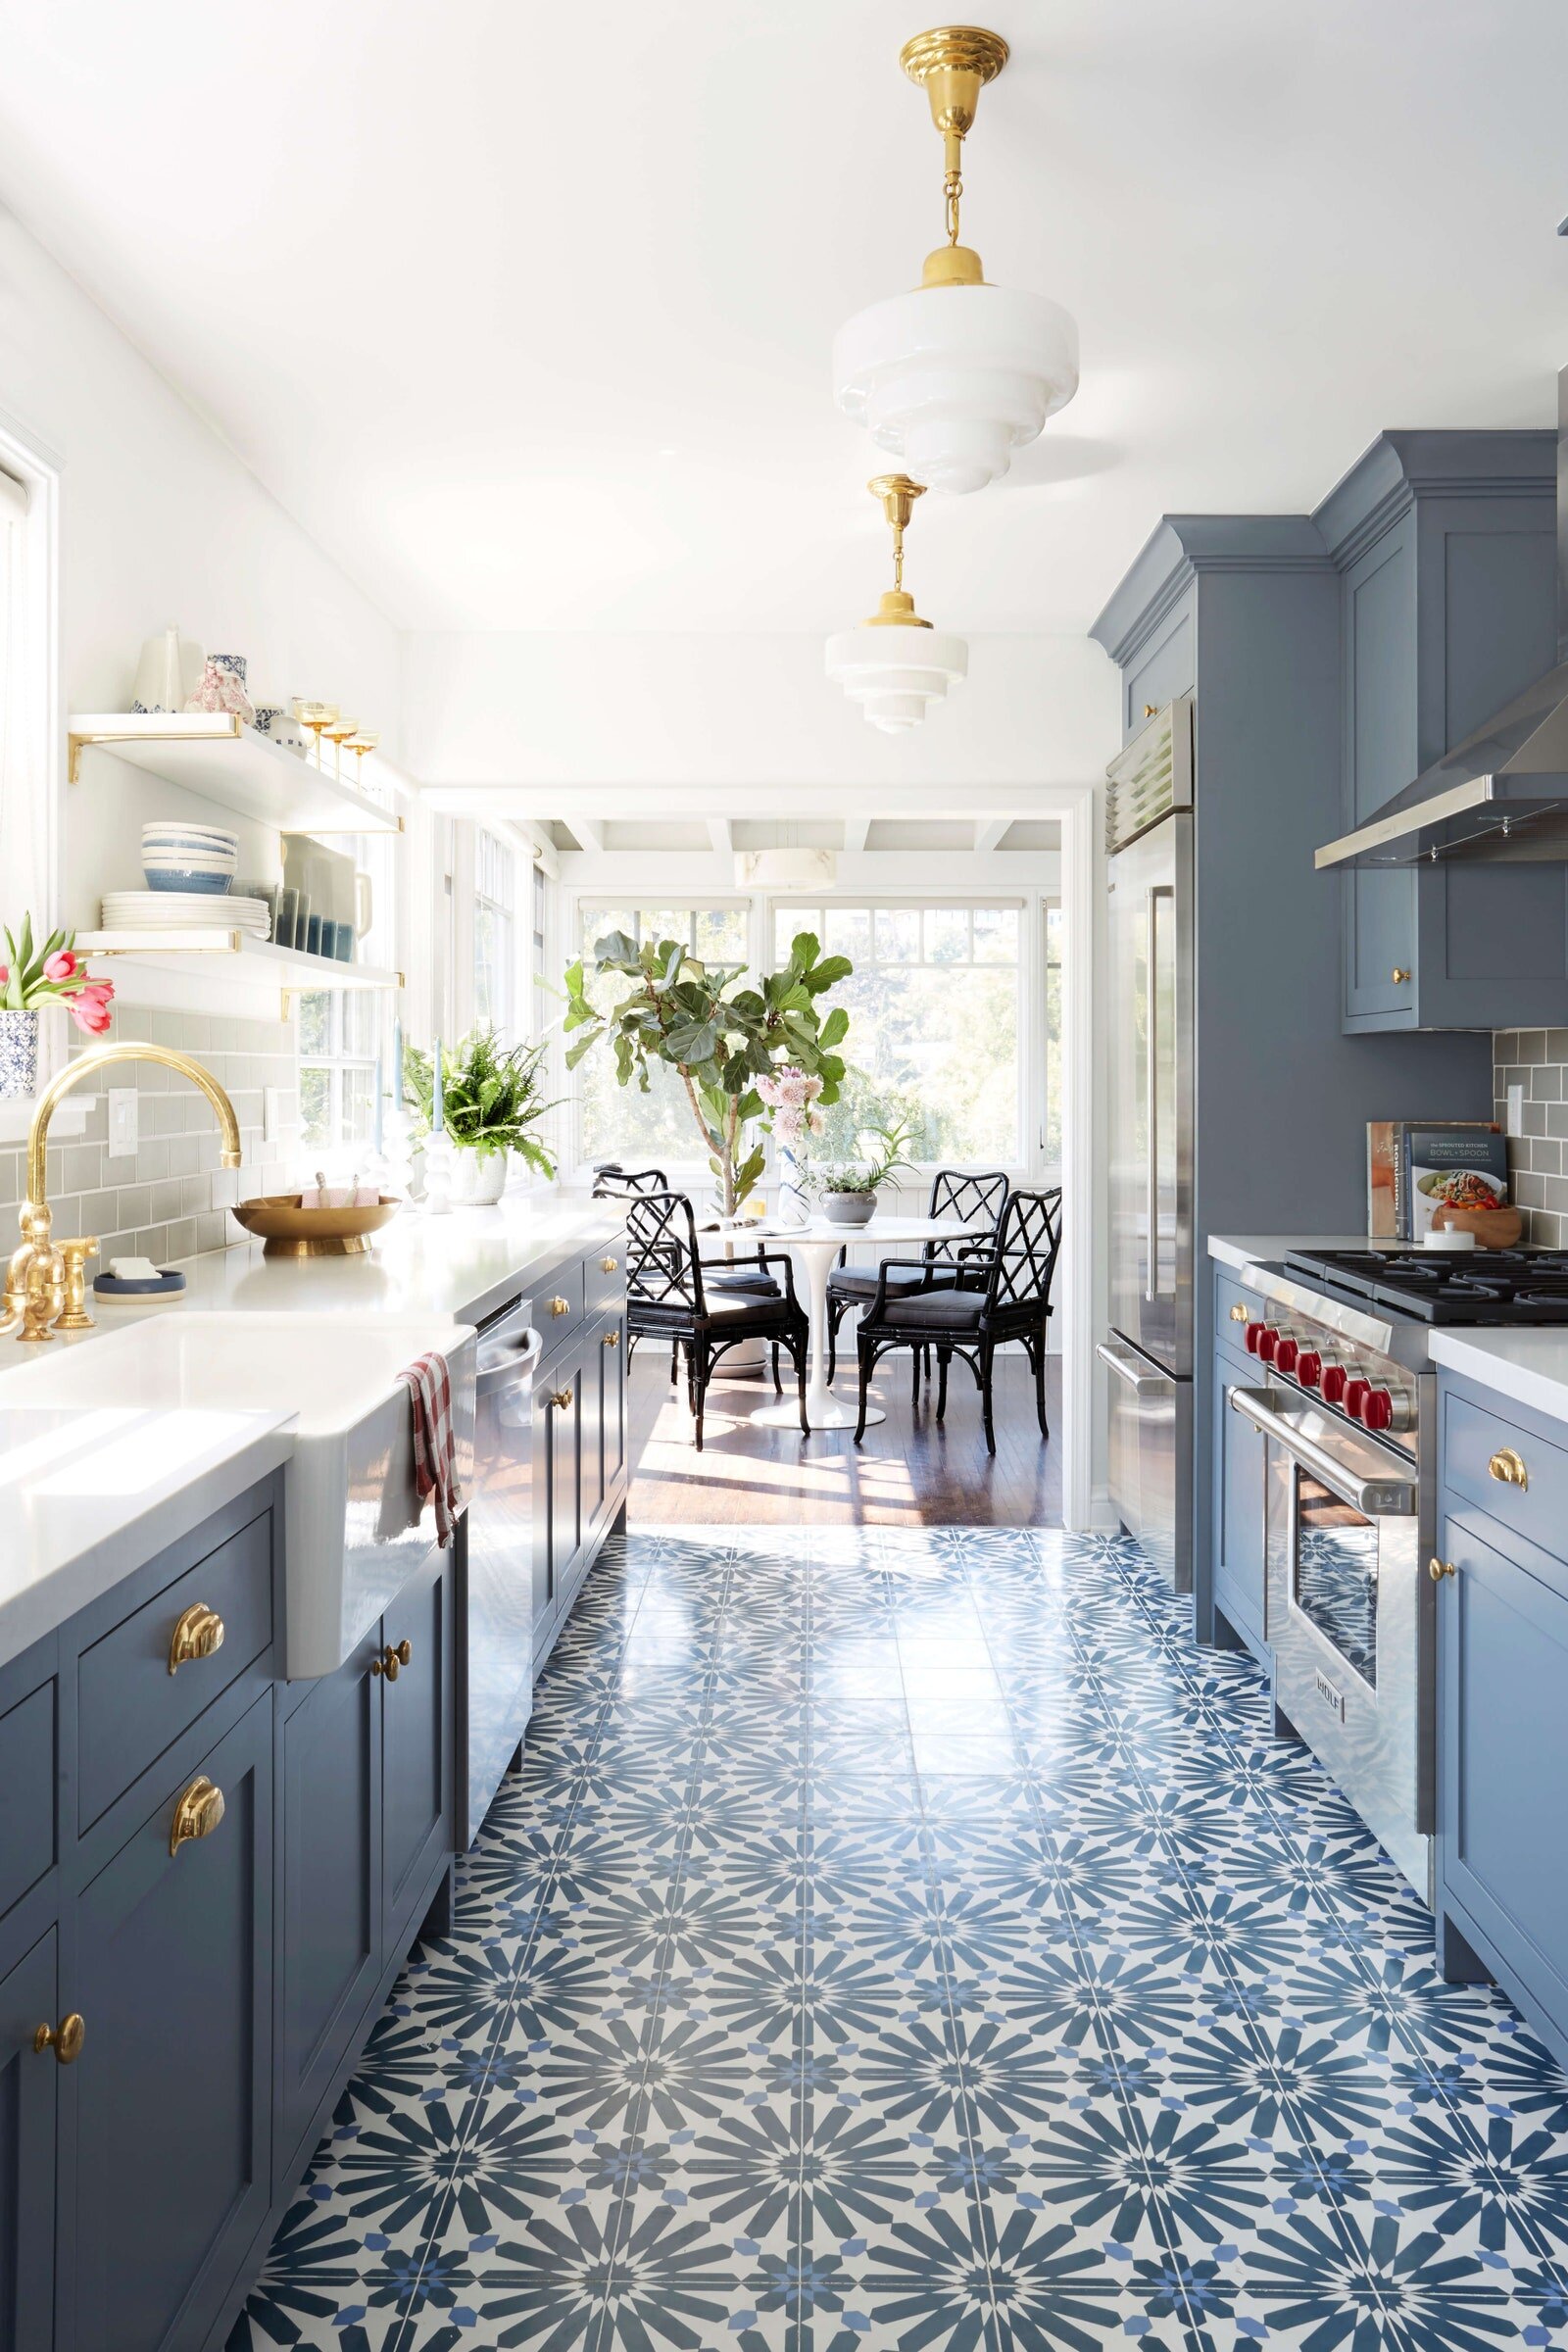 How to Remodel a Small Kitchen To Maximize Space